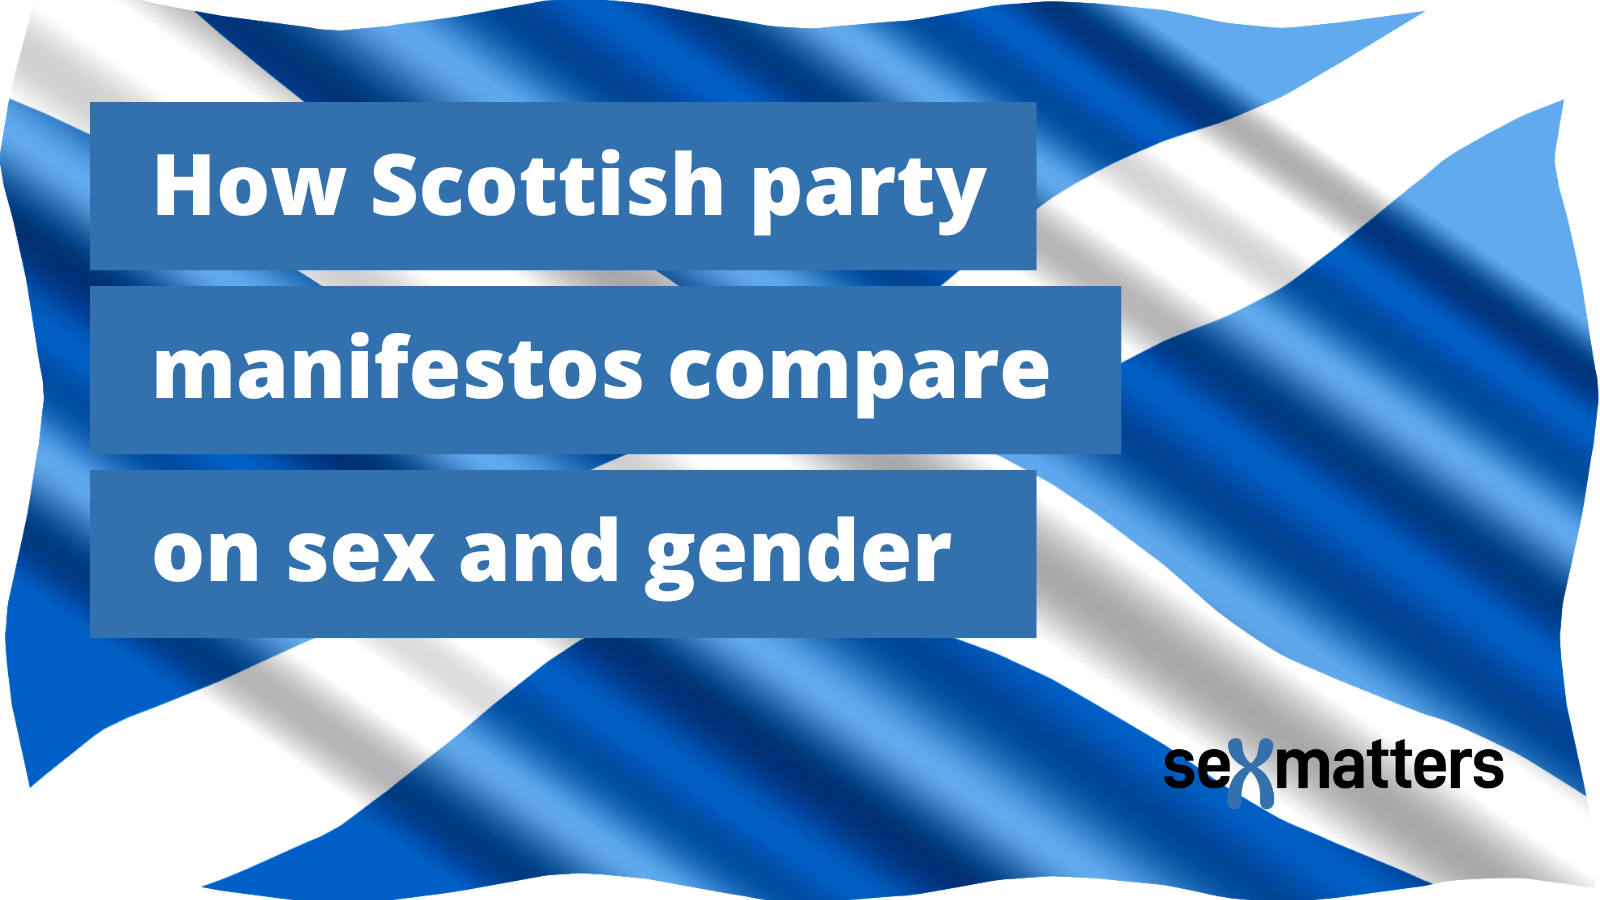 How Scottish party manifestos compare on sex and gender